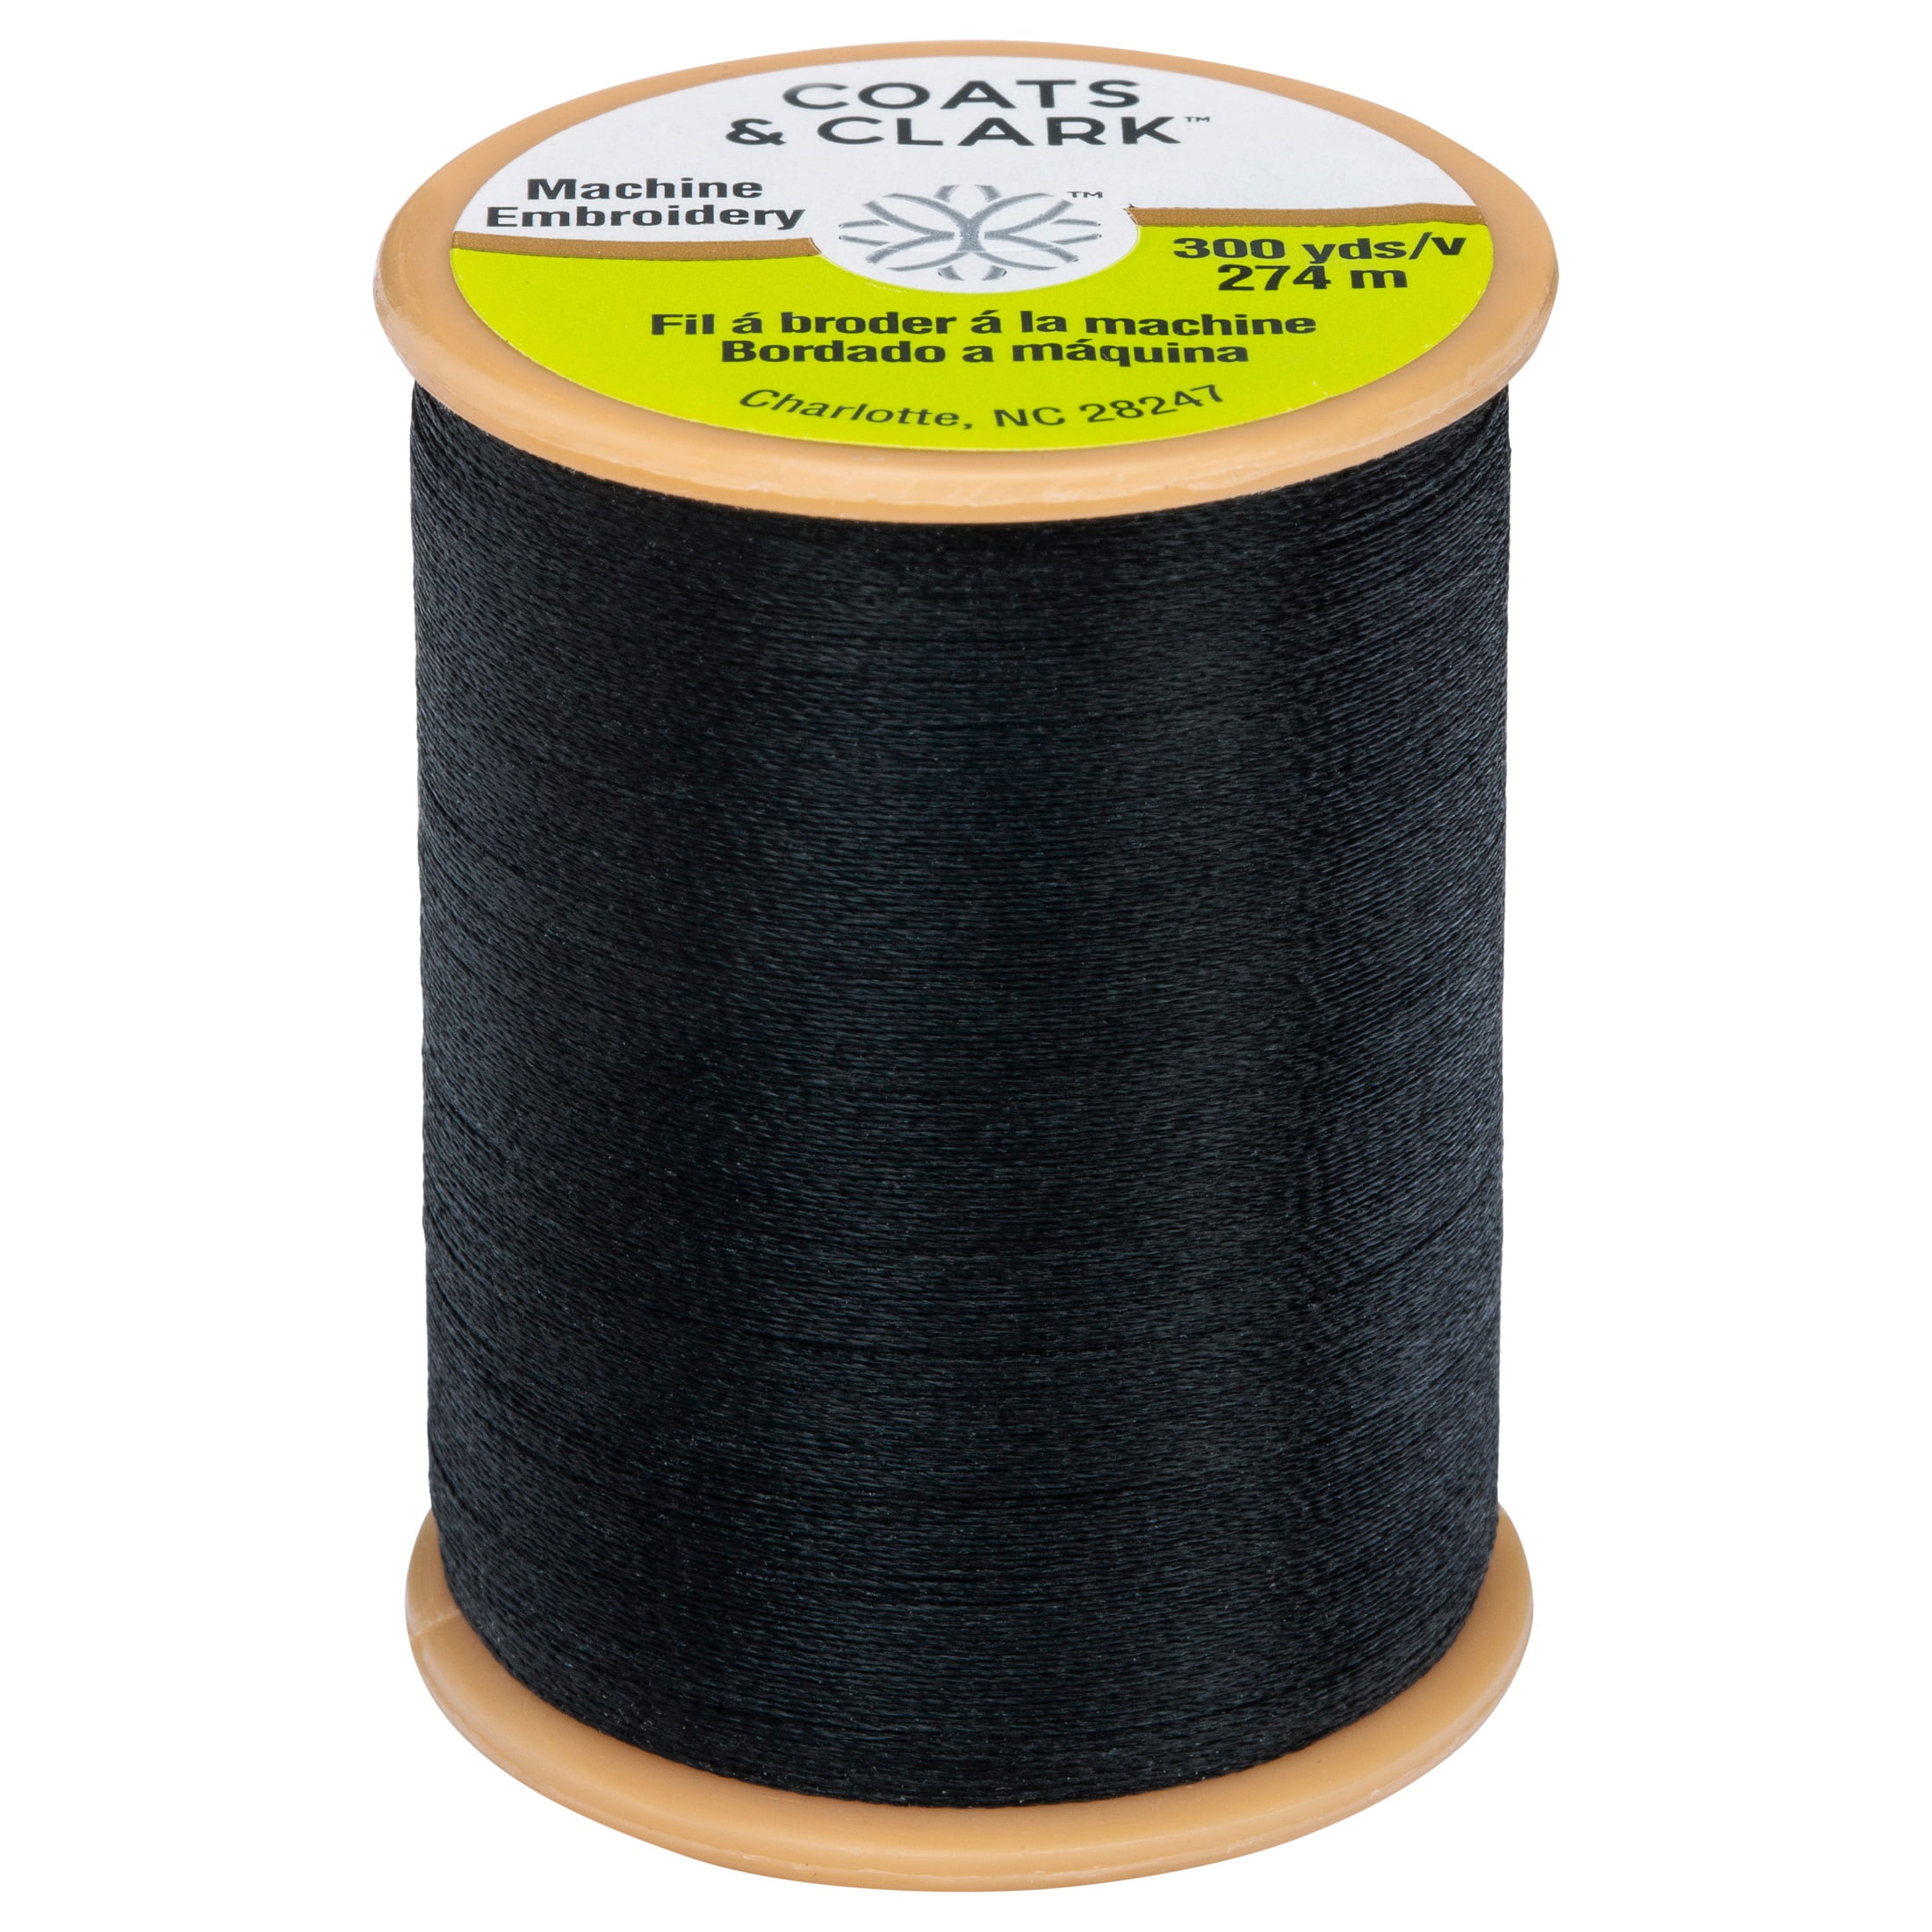 Coats & Clark Trilobal Embroidery Silver Polyester Thread, 300 Yards 